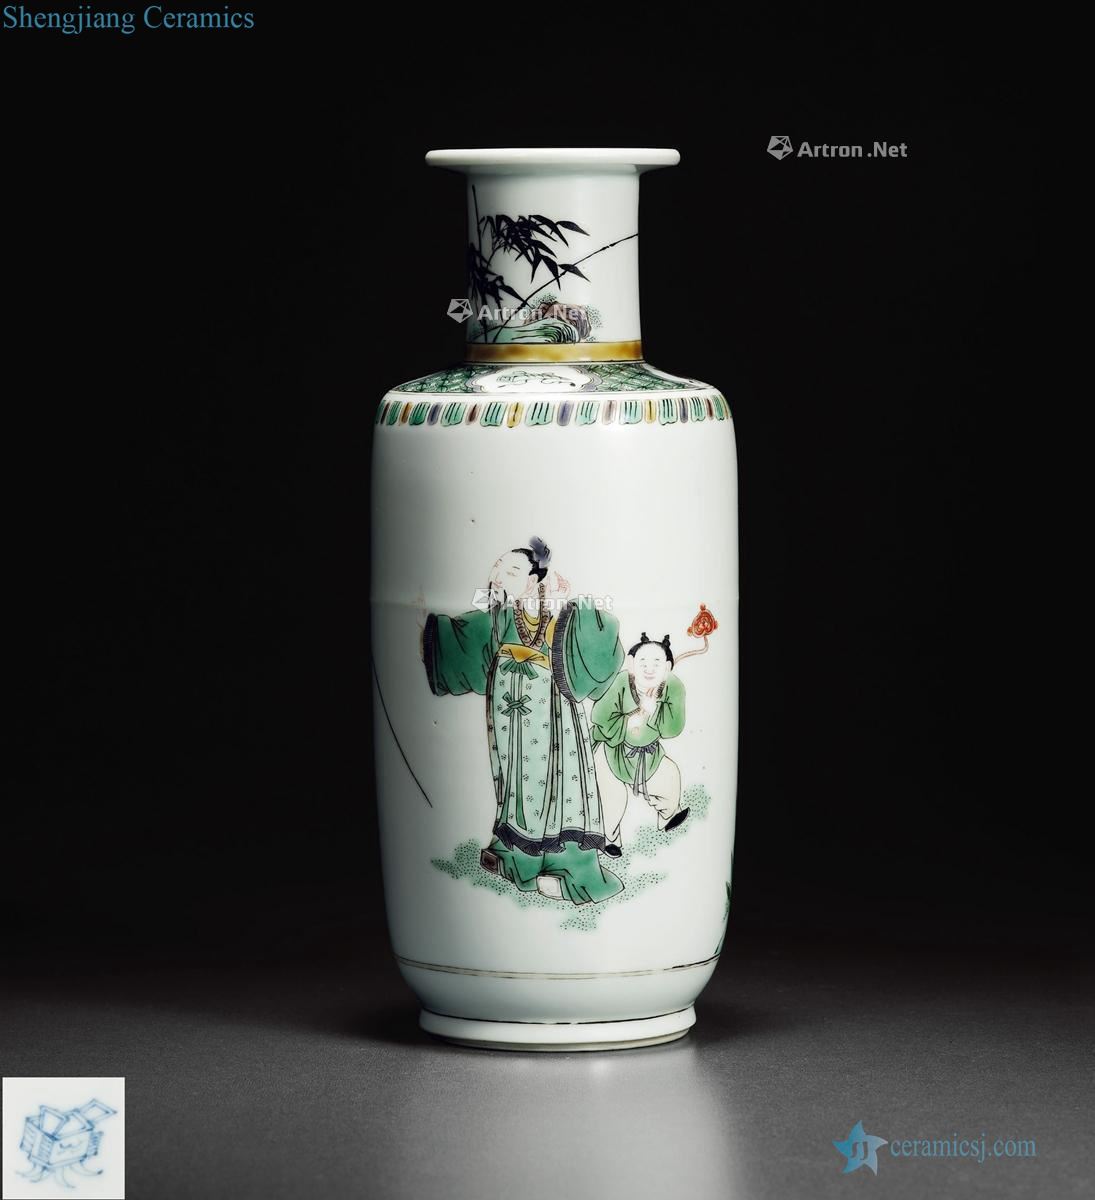 Stories of the qing emperor kangxi colorful figure show bottles